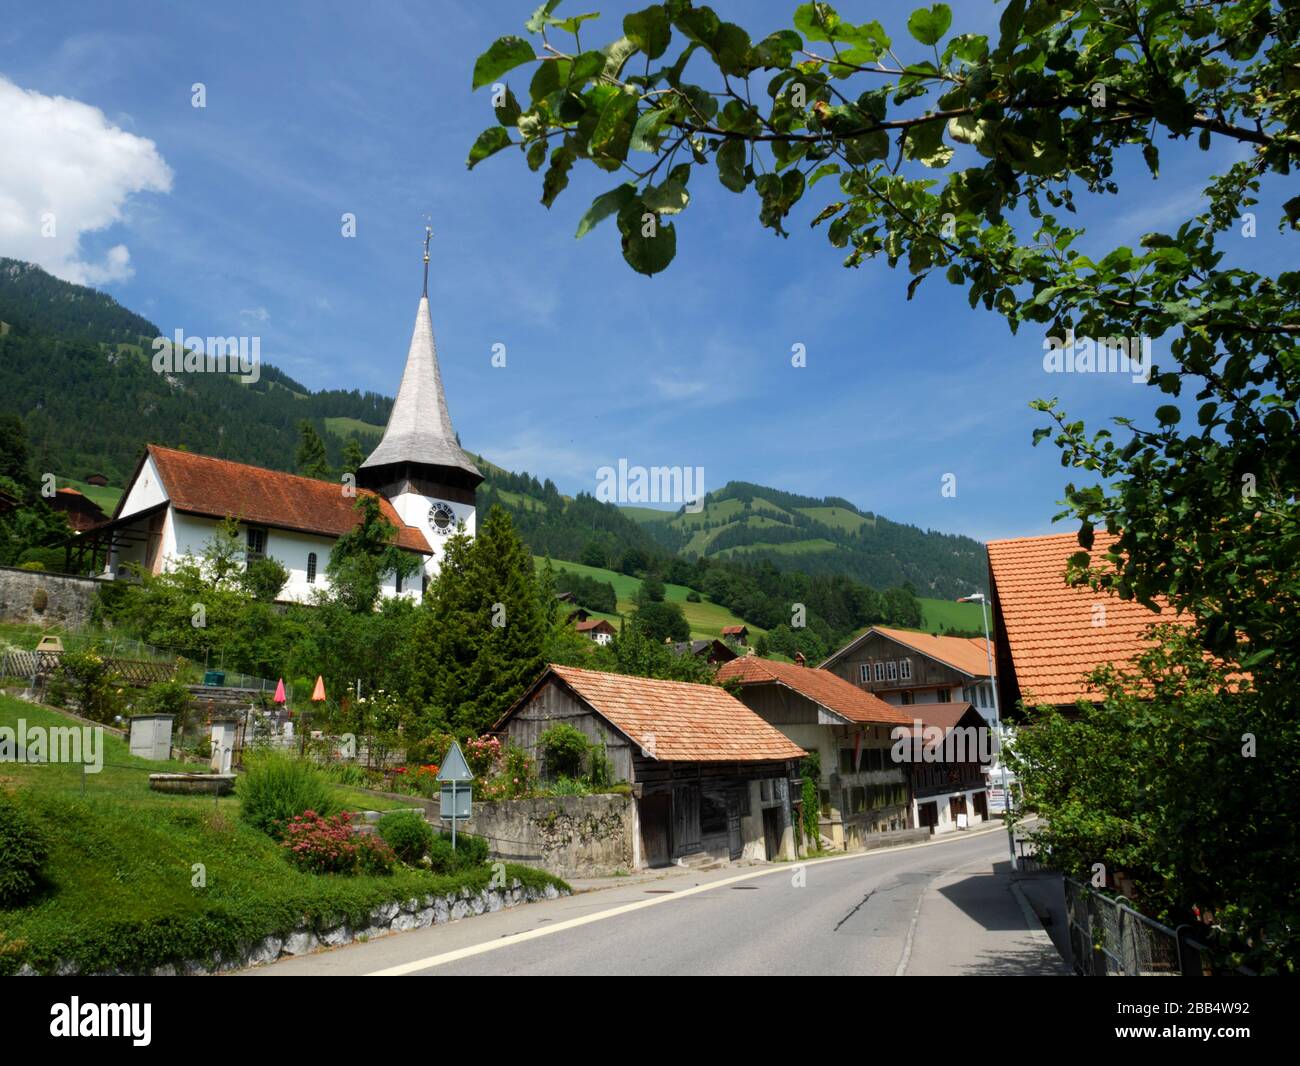 The church of St Michael at Erlenbach-im-Simmental, Switzerland. The village was the birthplace of Jokob Amman, founder of the Amish movement. Stock Photo